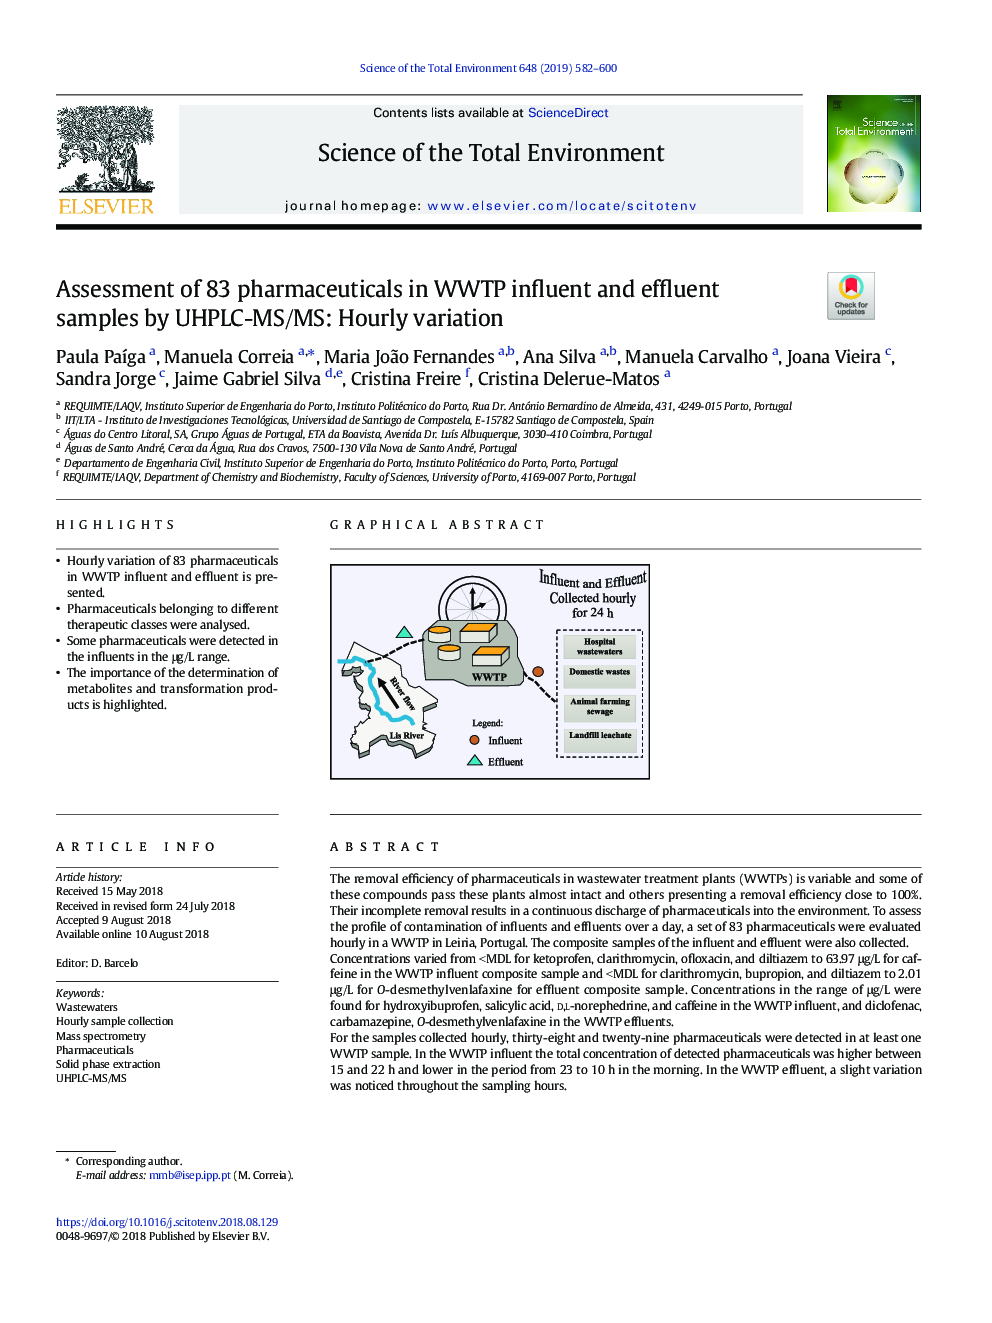 Assessment of 83 pharmaceuticals in WWTP influent and effluent samples by UHPLC-MS/MS: Hourly variation